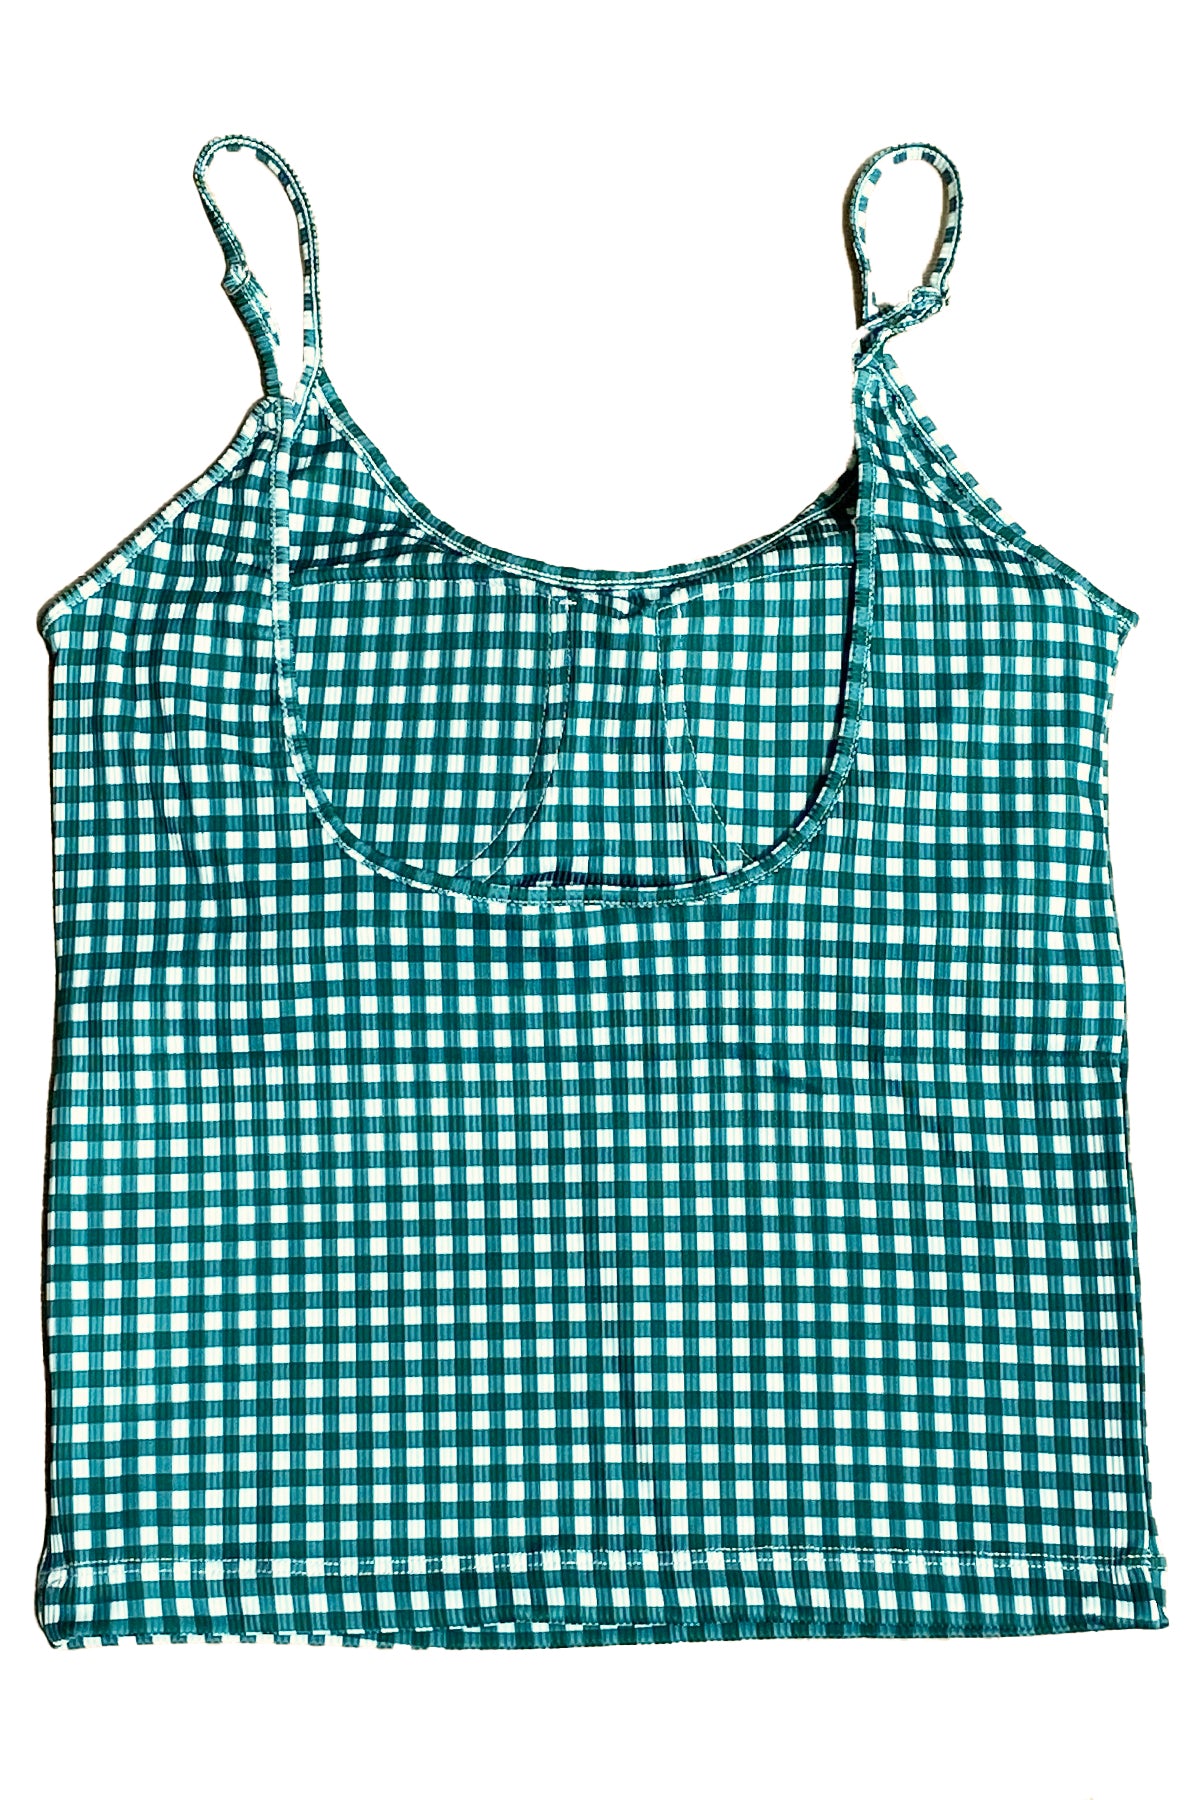 Sister's Bra Cup Camisole / Green gingham